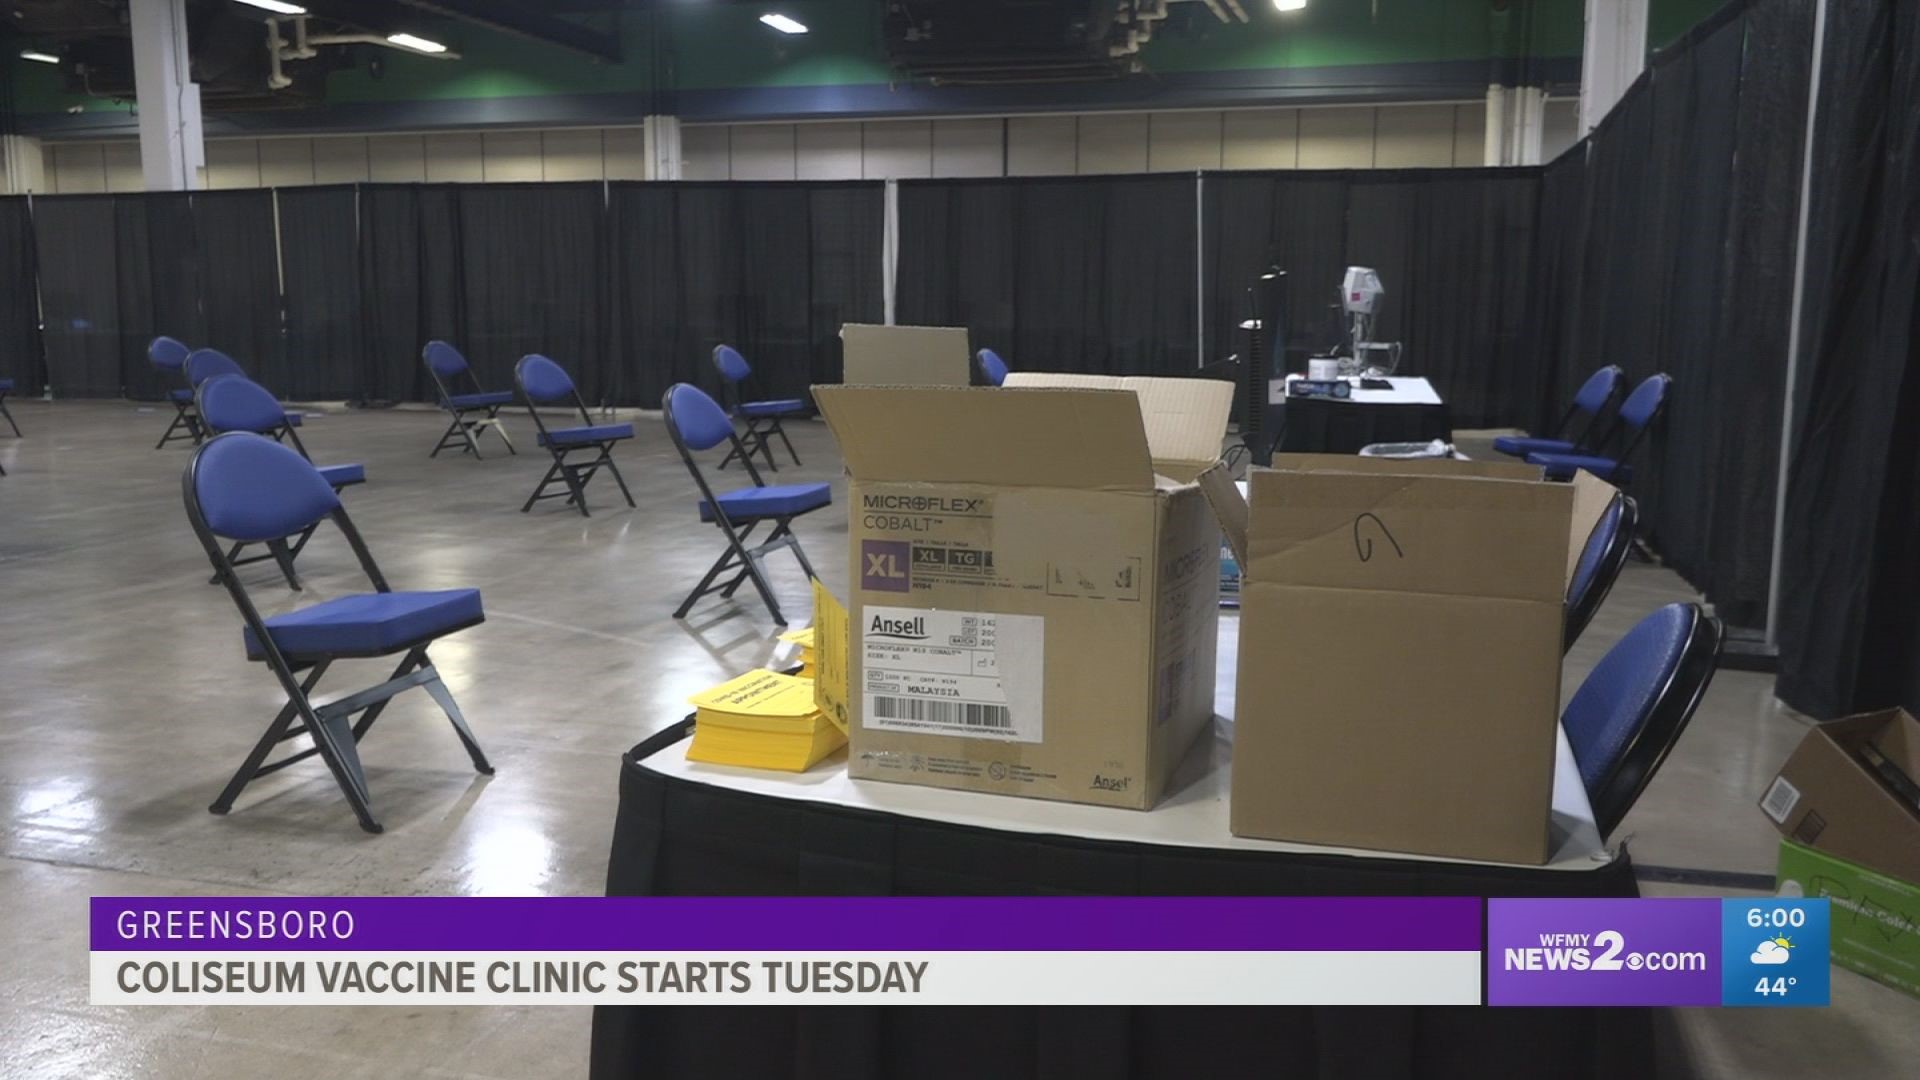 Thousands of people made appointments through the Guilford County Health Department and Cone Health. They're set to get their vaccines on Tuesday.